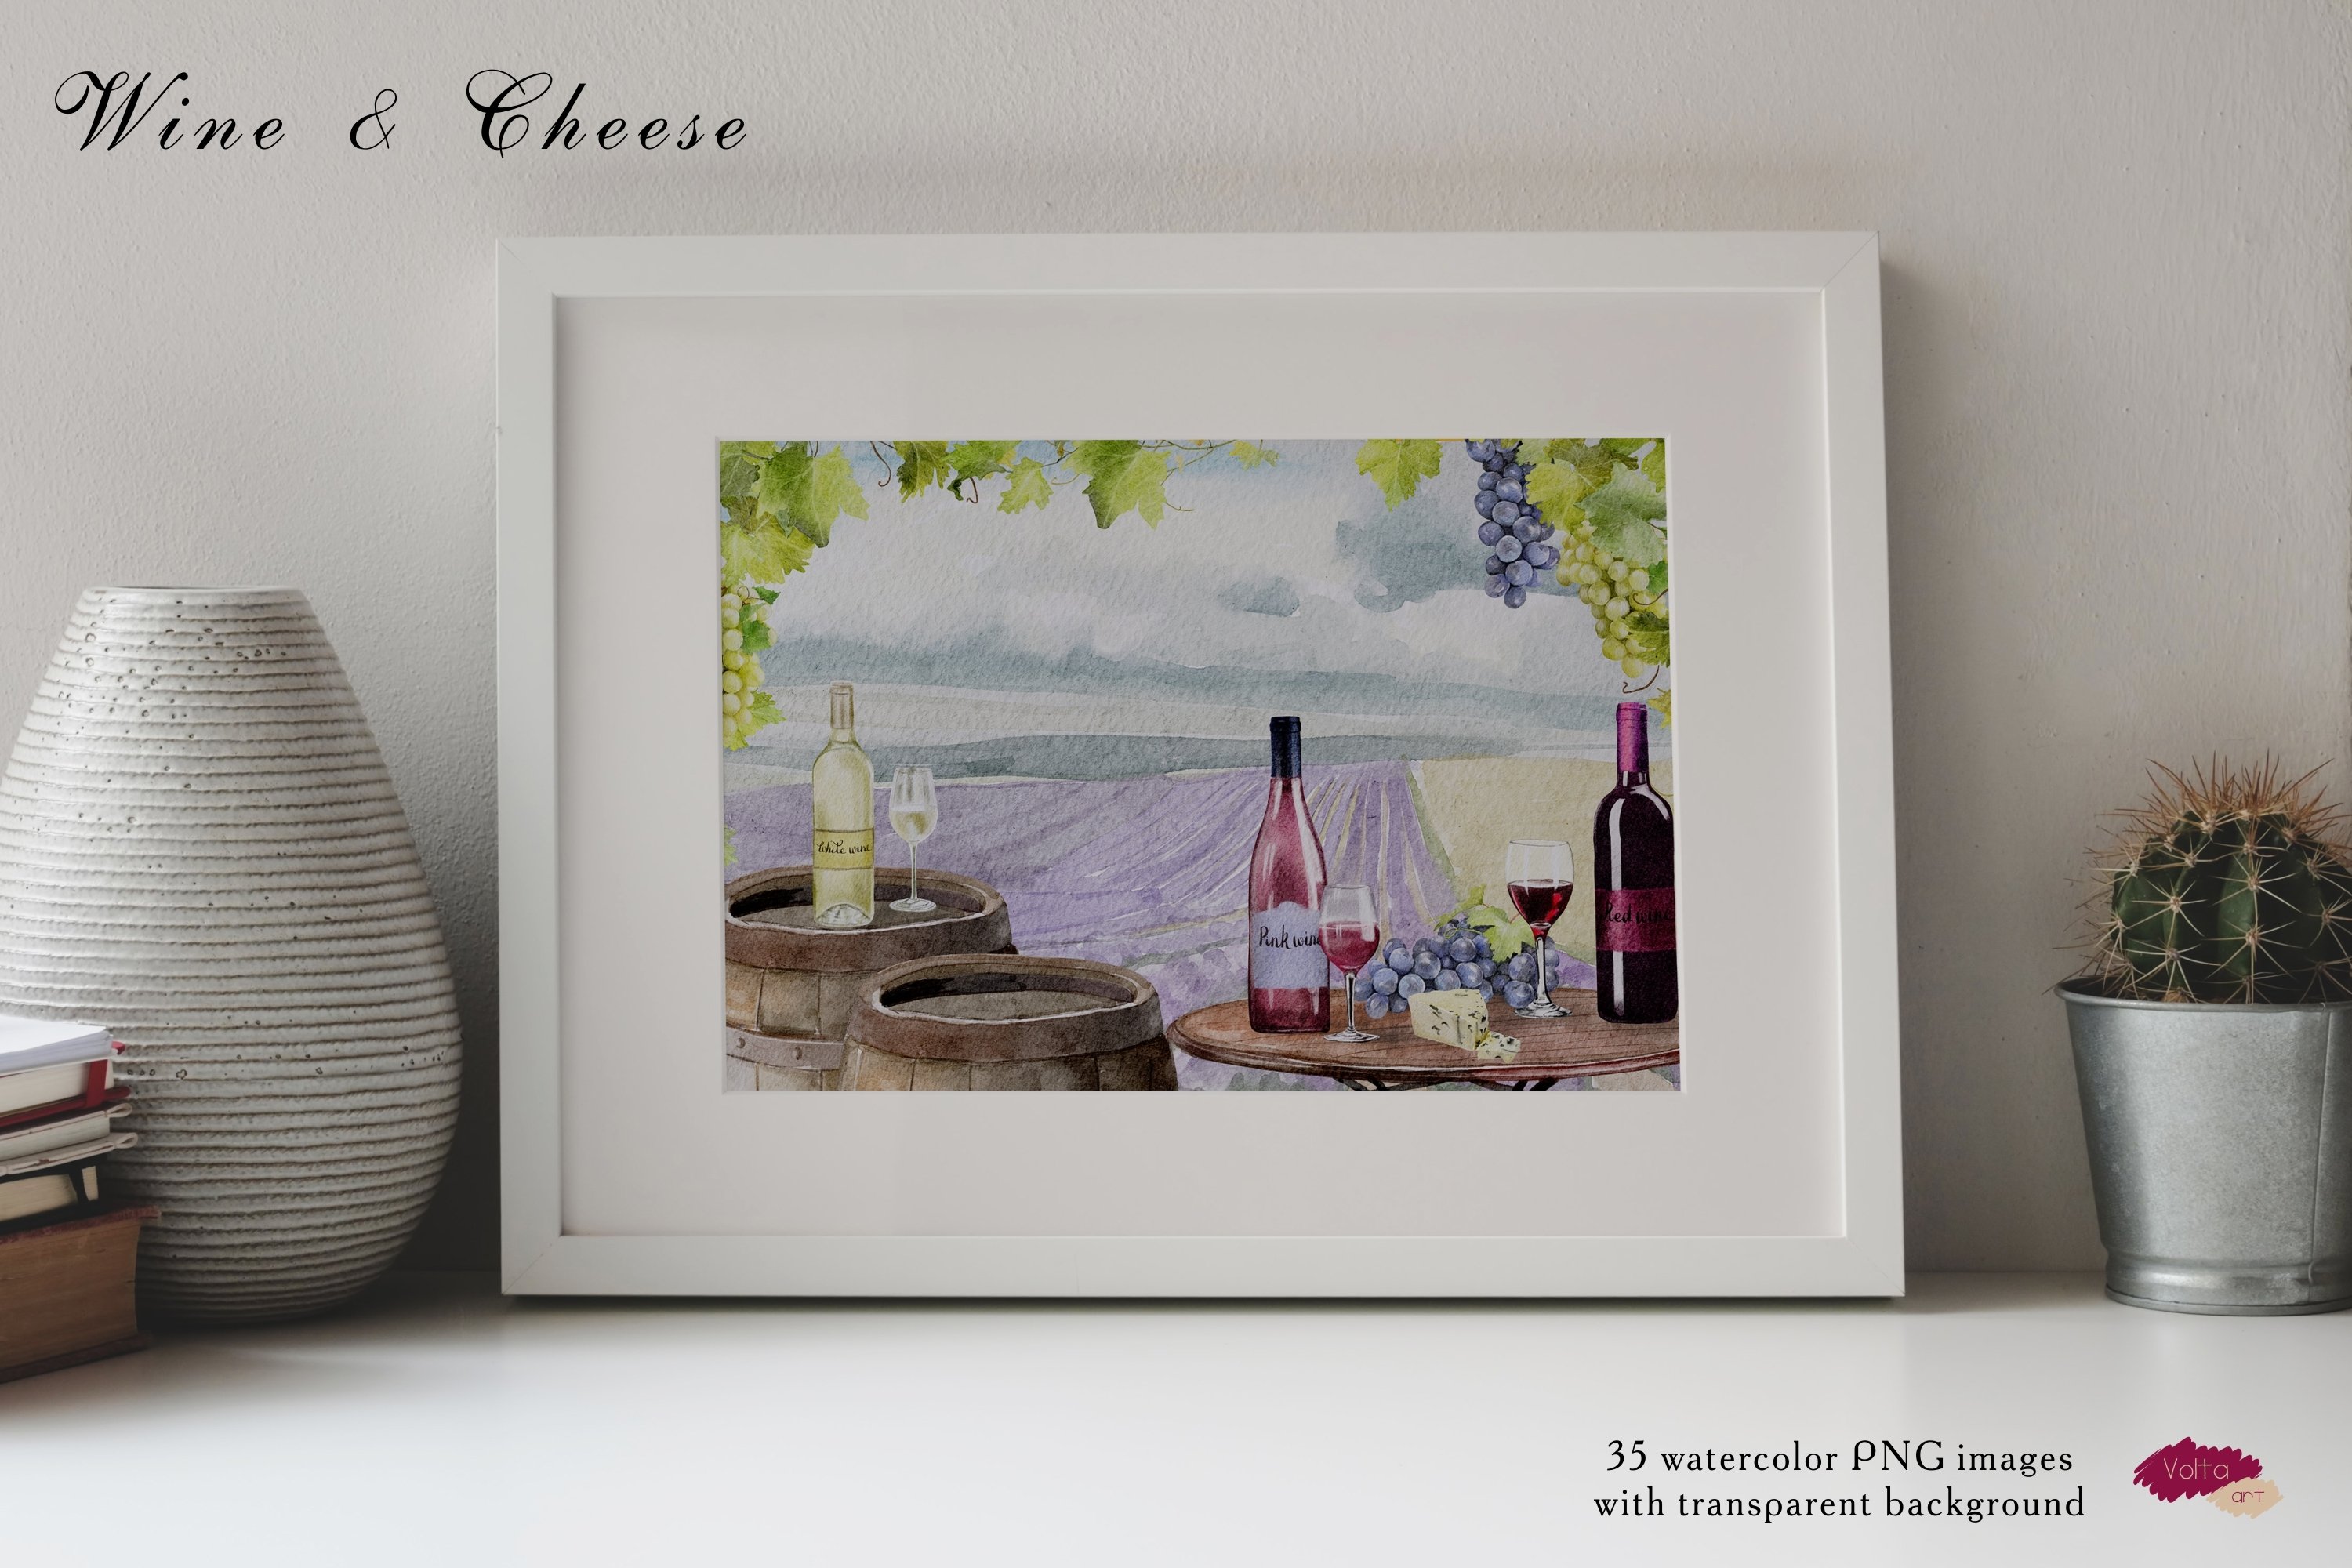 Charming painting depicting a wine barrel and wine and hard cheese against the background of grape fields.